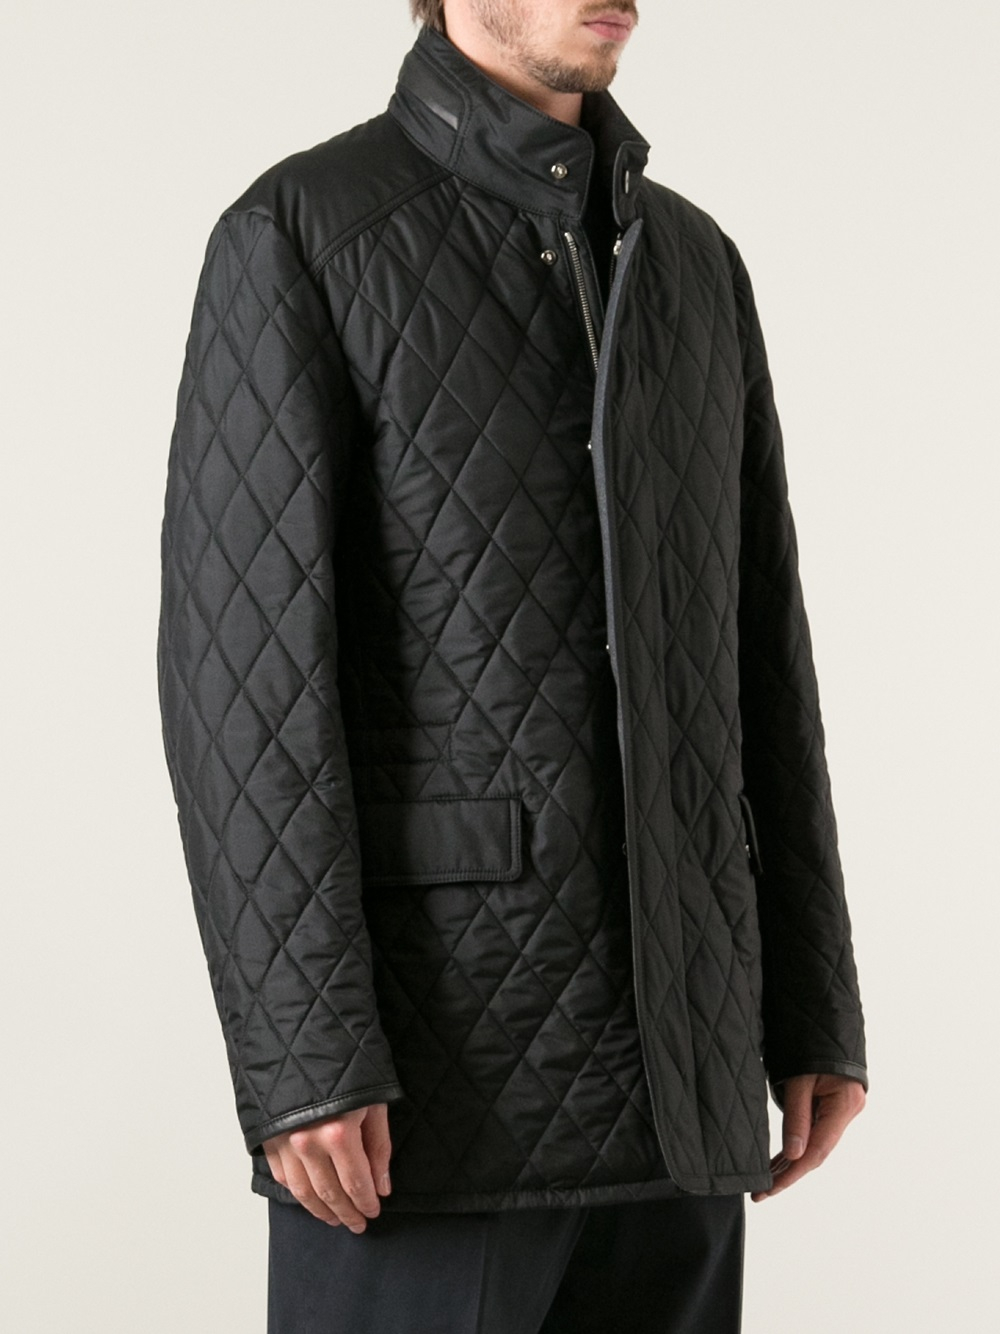 Lyst - Brioni Quilted Jacket in Black for Men